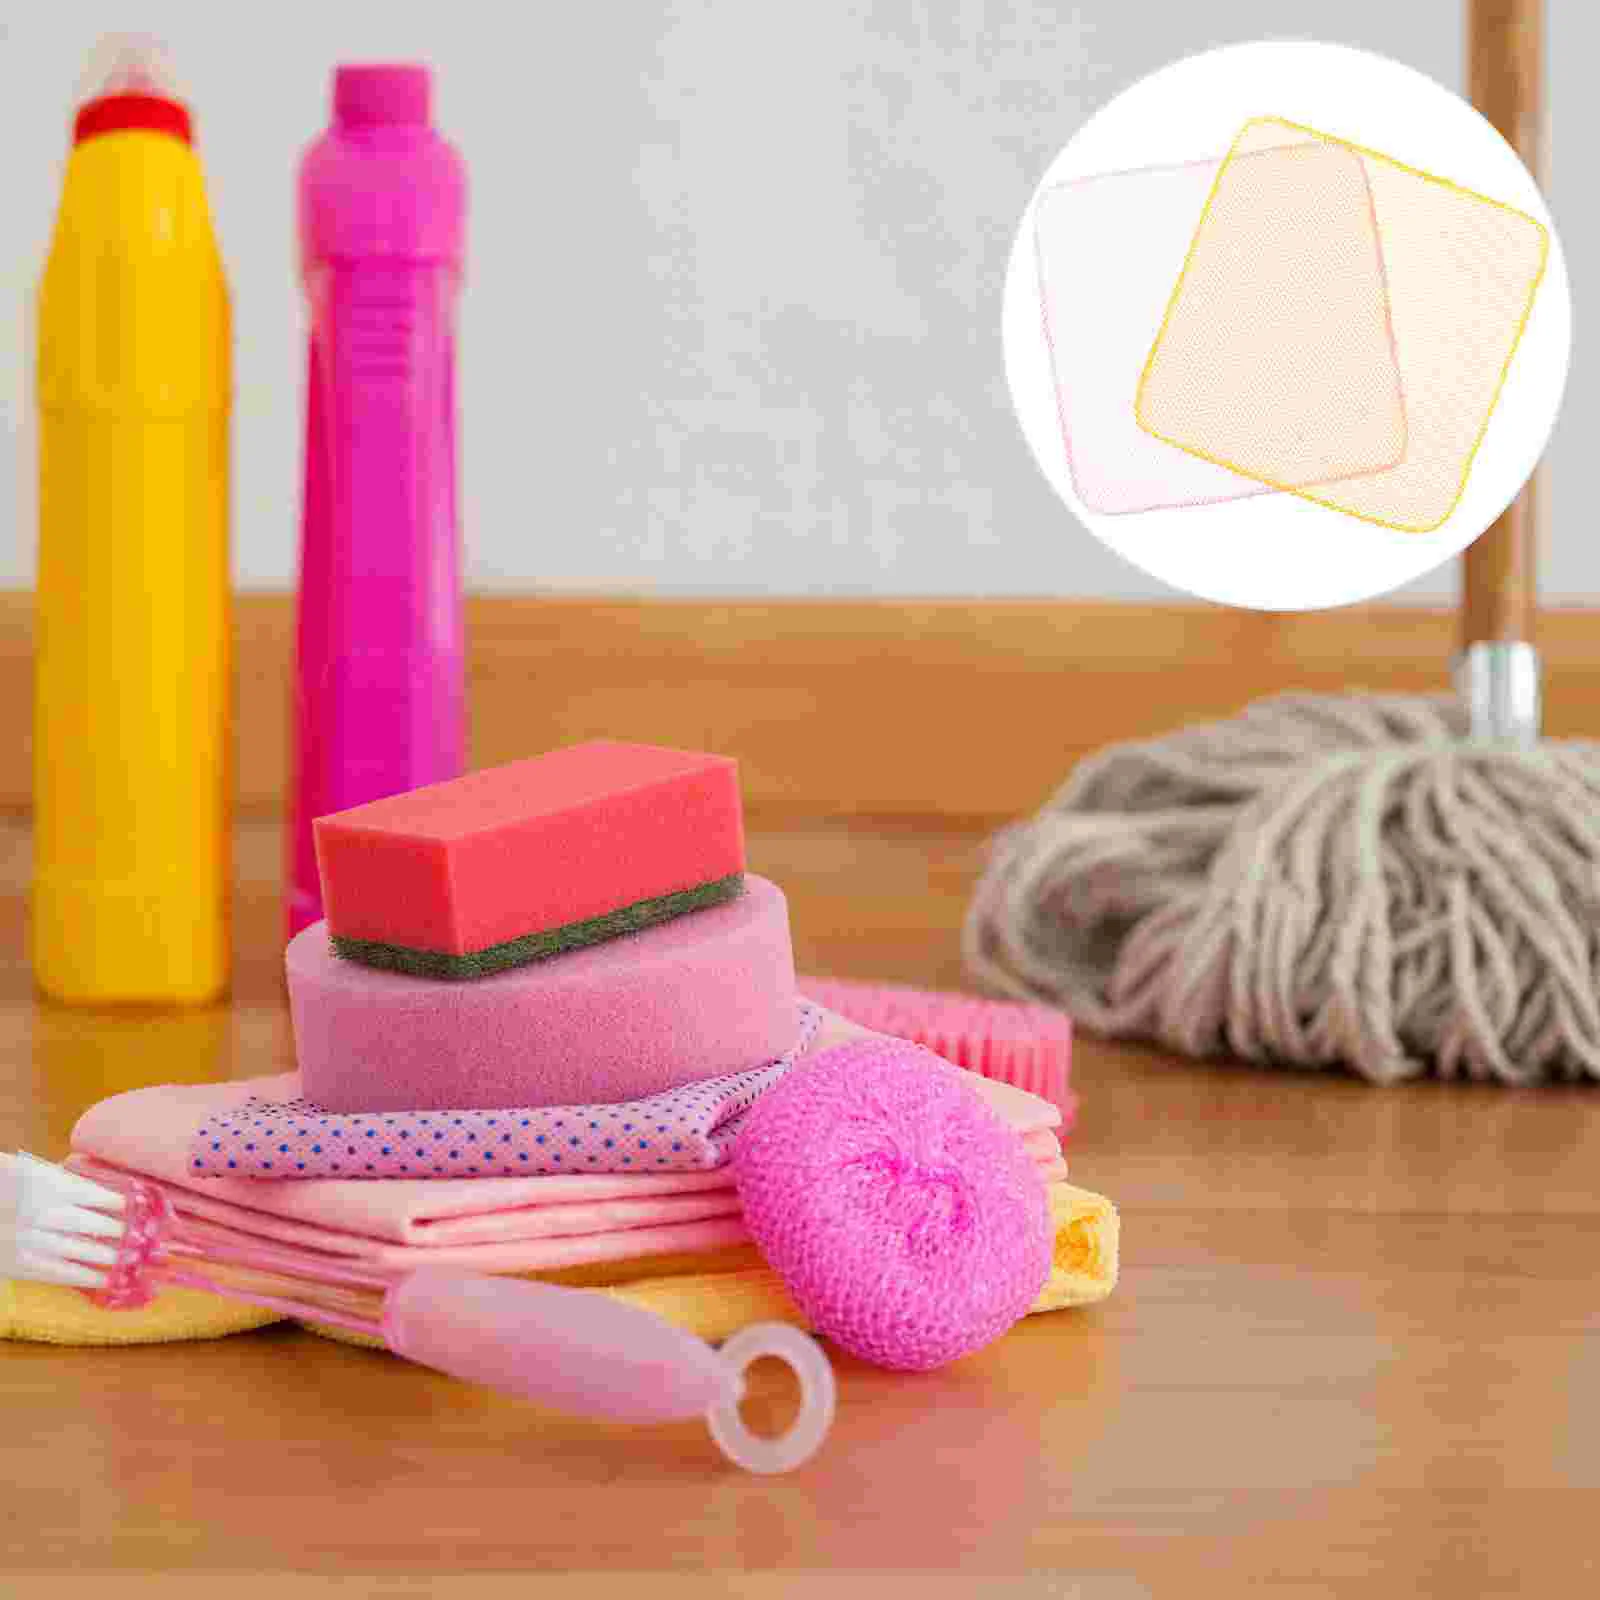 

Dish Cloth Kitchen Washing Cloths Net Cleaning Dishes Towel Scrubber Towels Mesh Wash Hand Sponges Dry Dishwashing Quick Rag